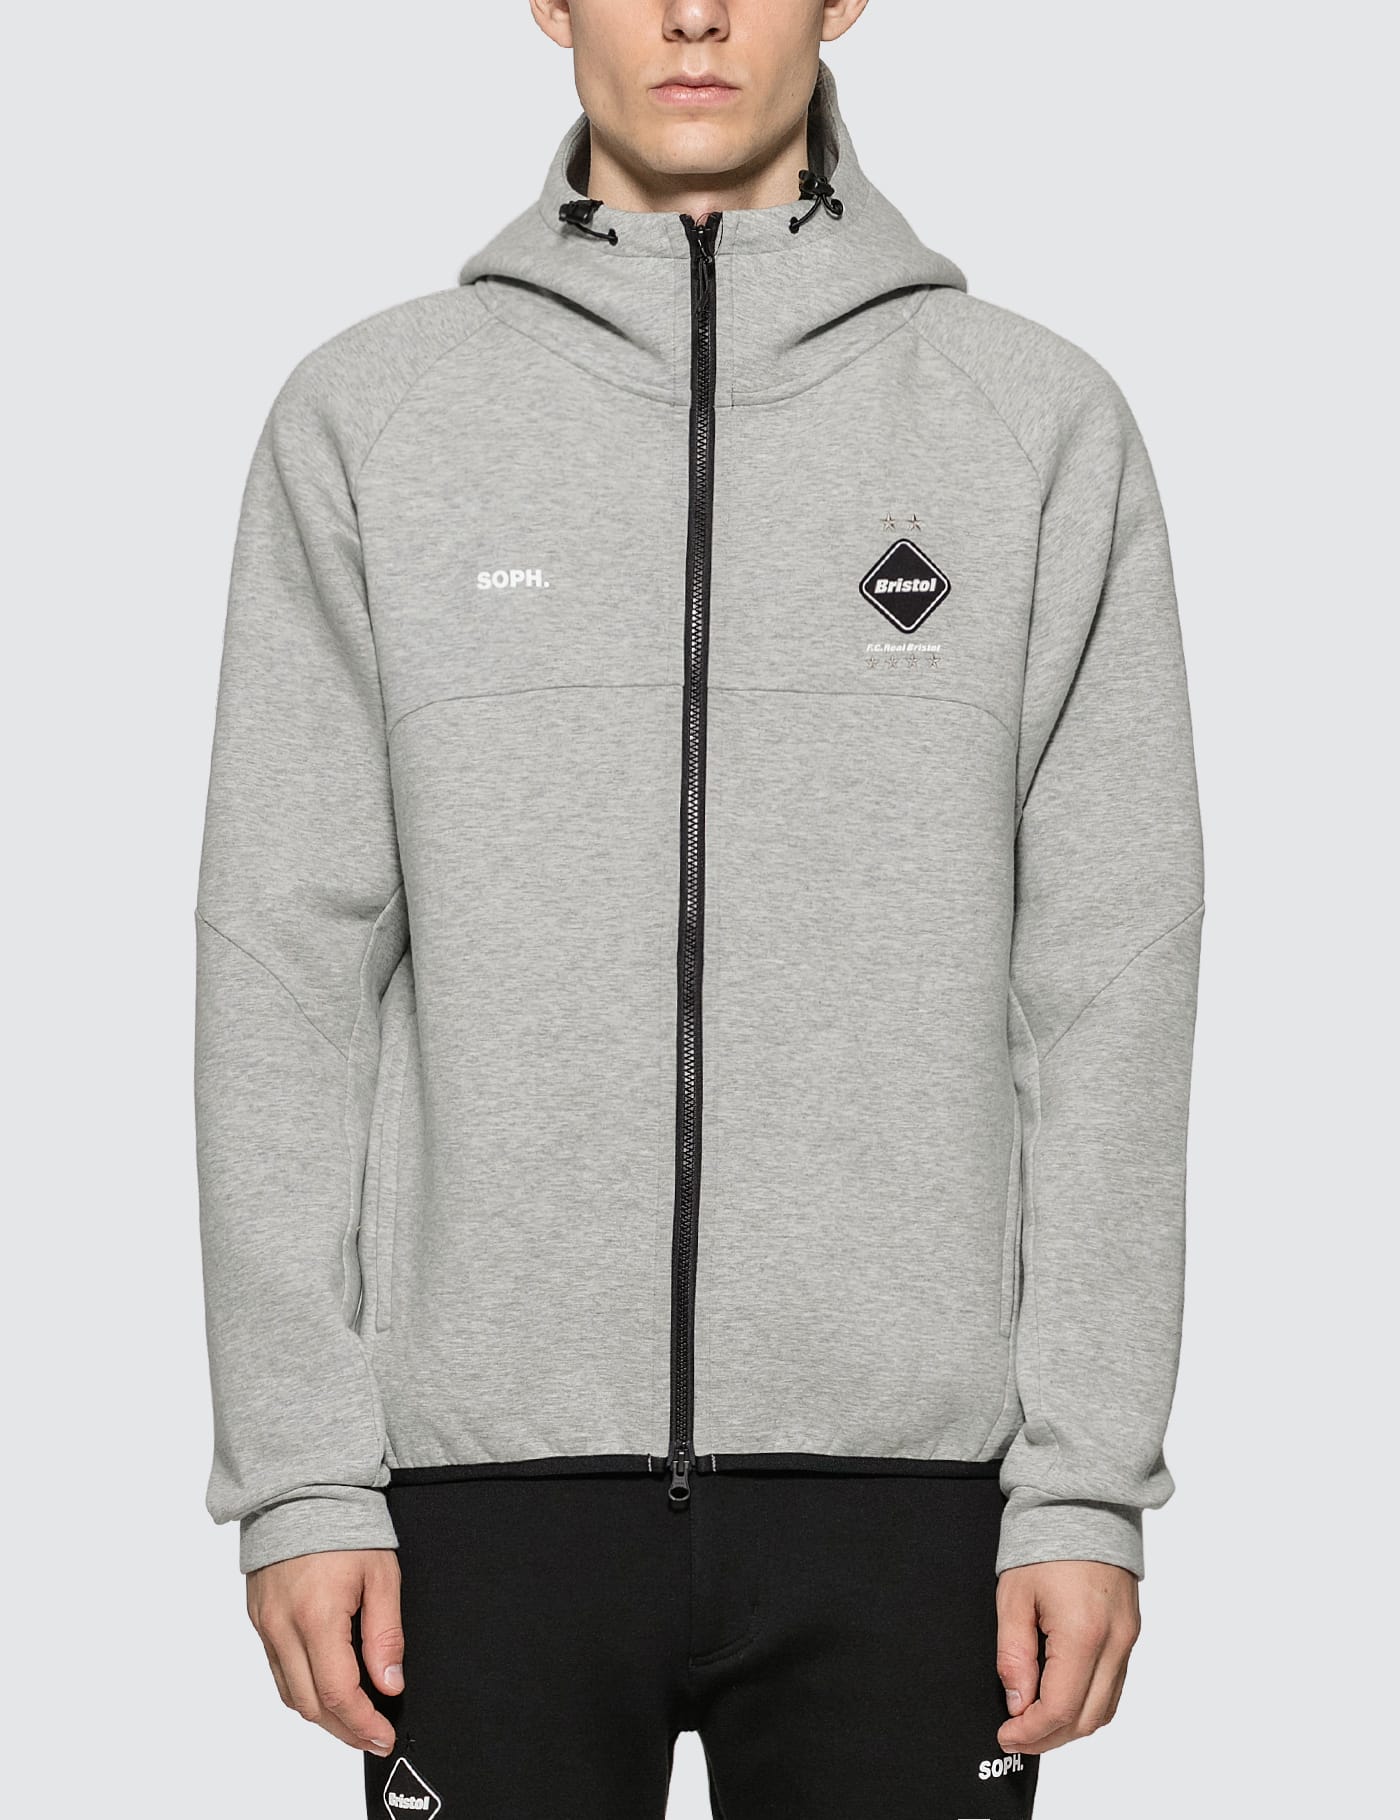 F.C. Real Bristol - Ventilation Hoodie | HBX - Globally Curated